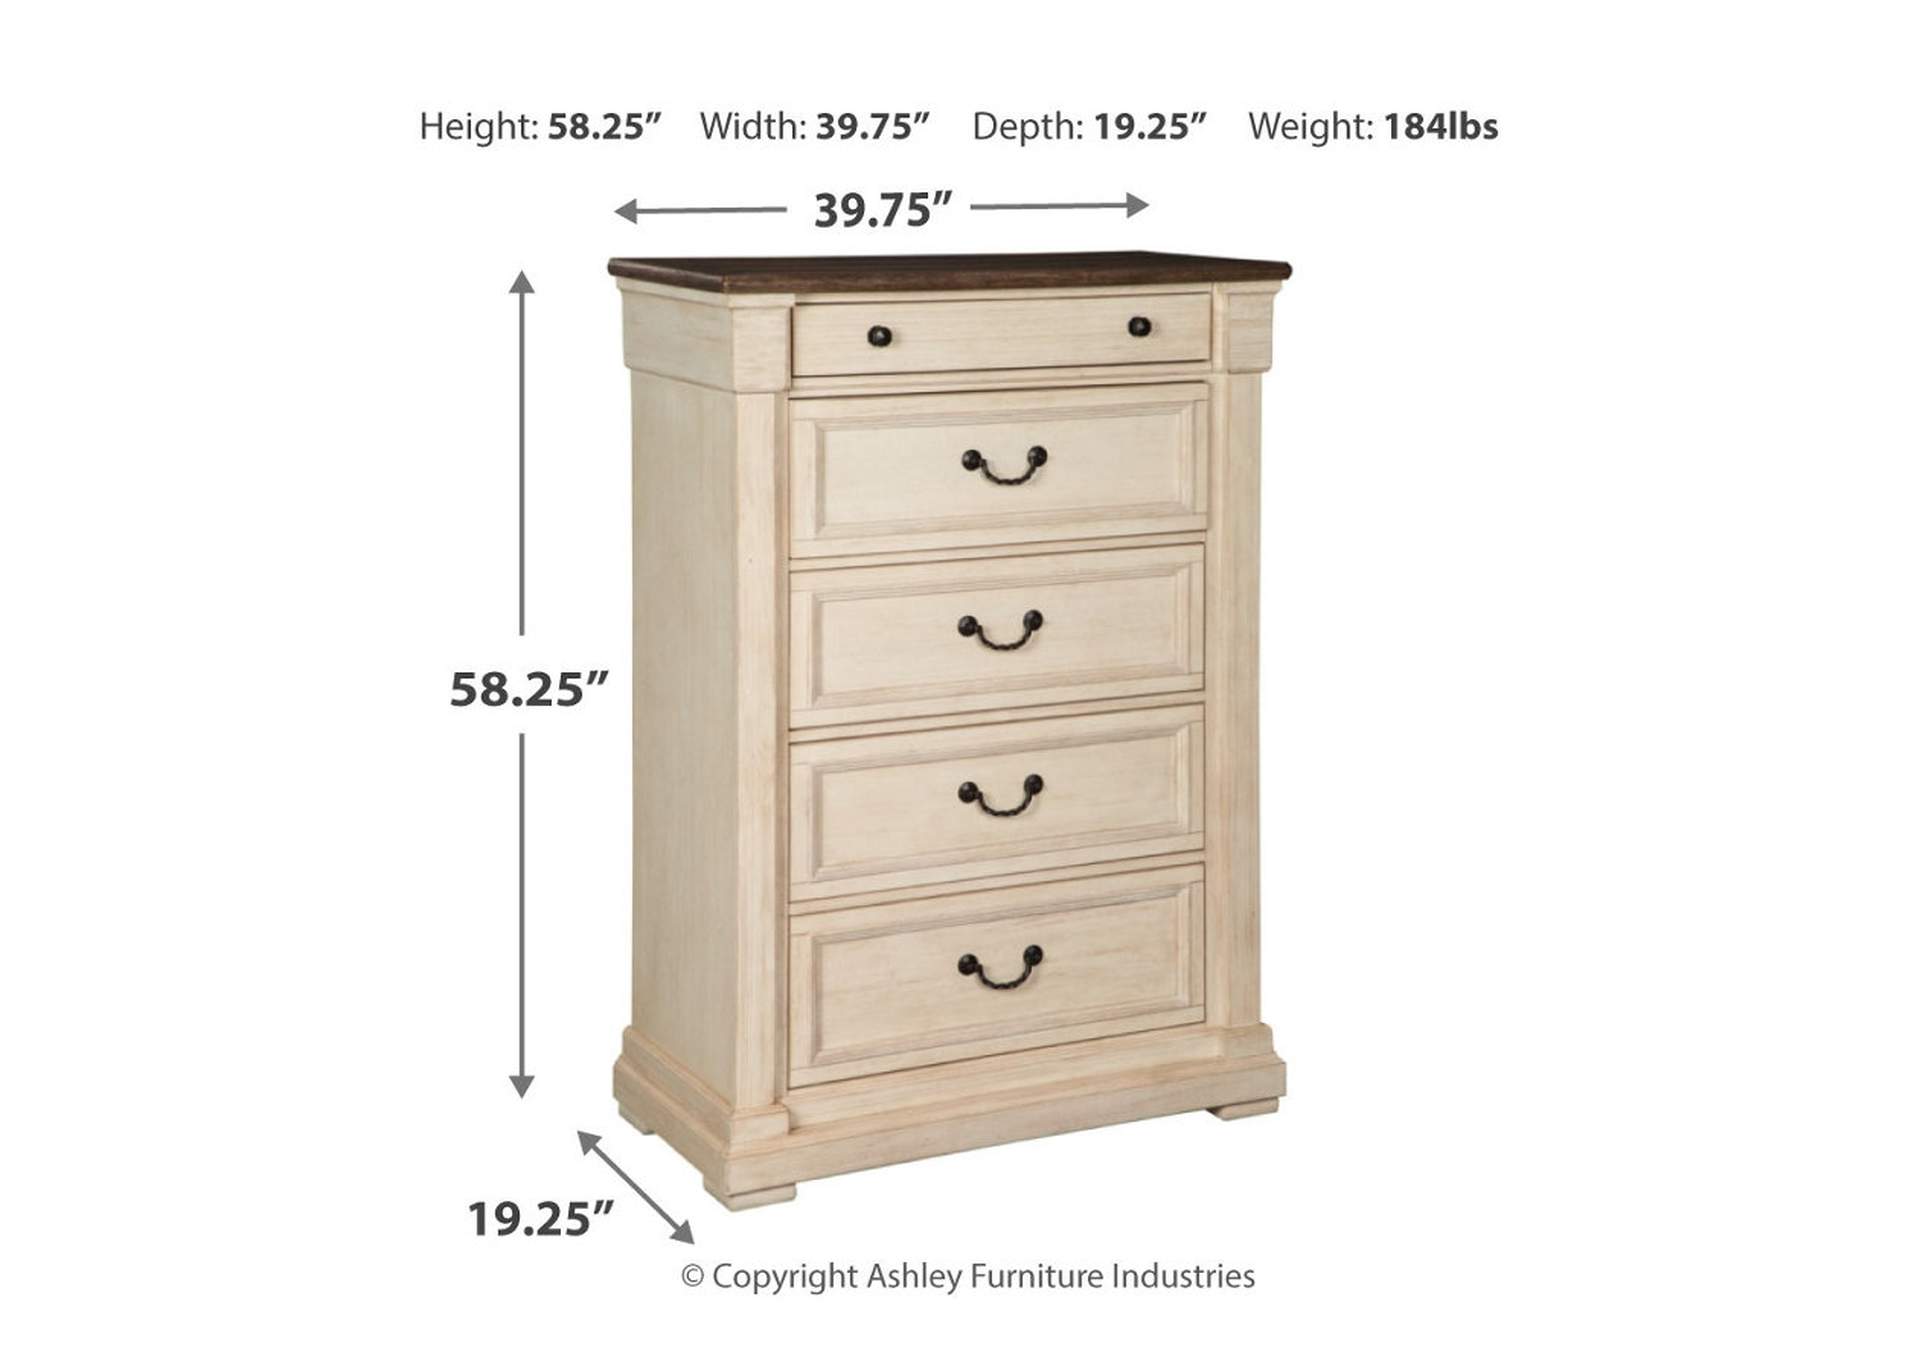 Bolanburg Chest of Drawers,Signature Design By Ashley